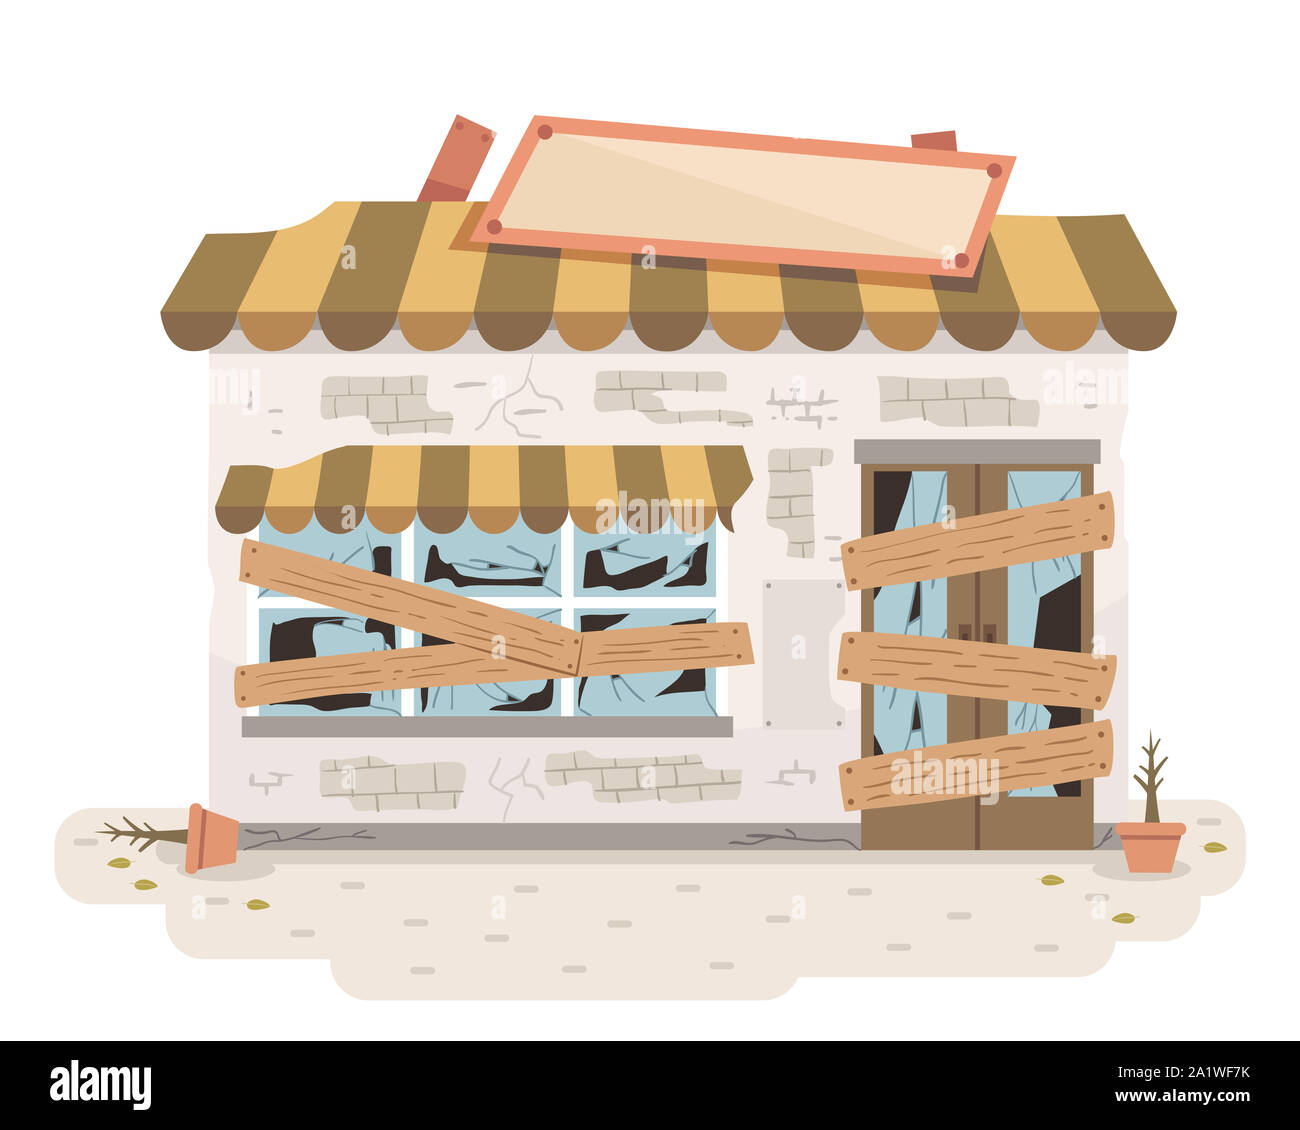 Illustration of an Old and Abandoned Store with Broken Signage, Glasses and Wooden Planks Stock Photo